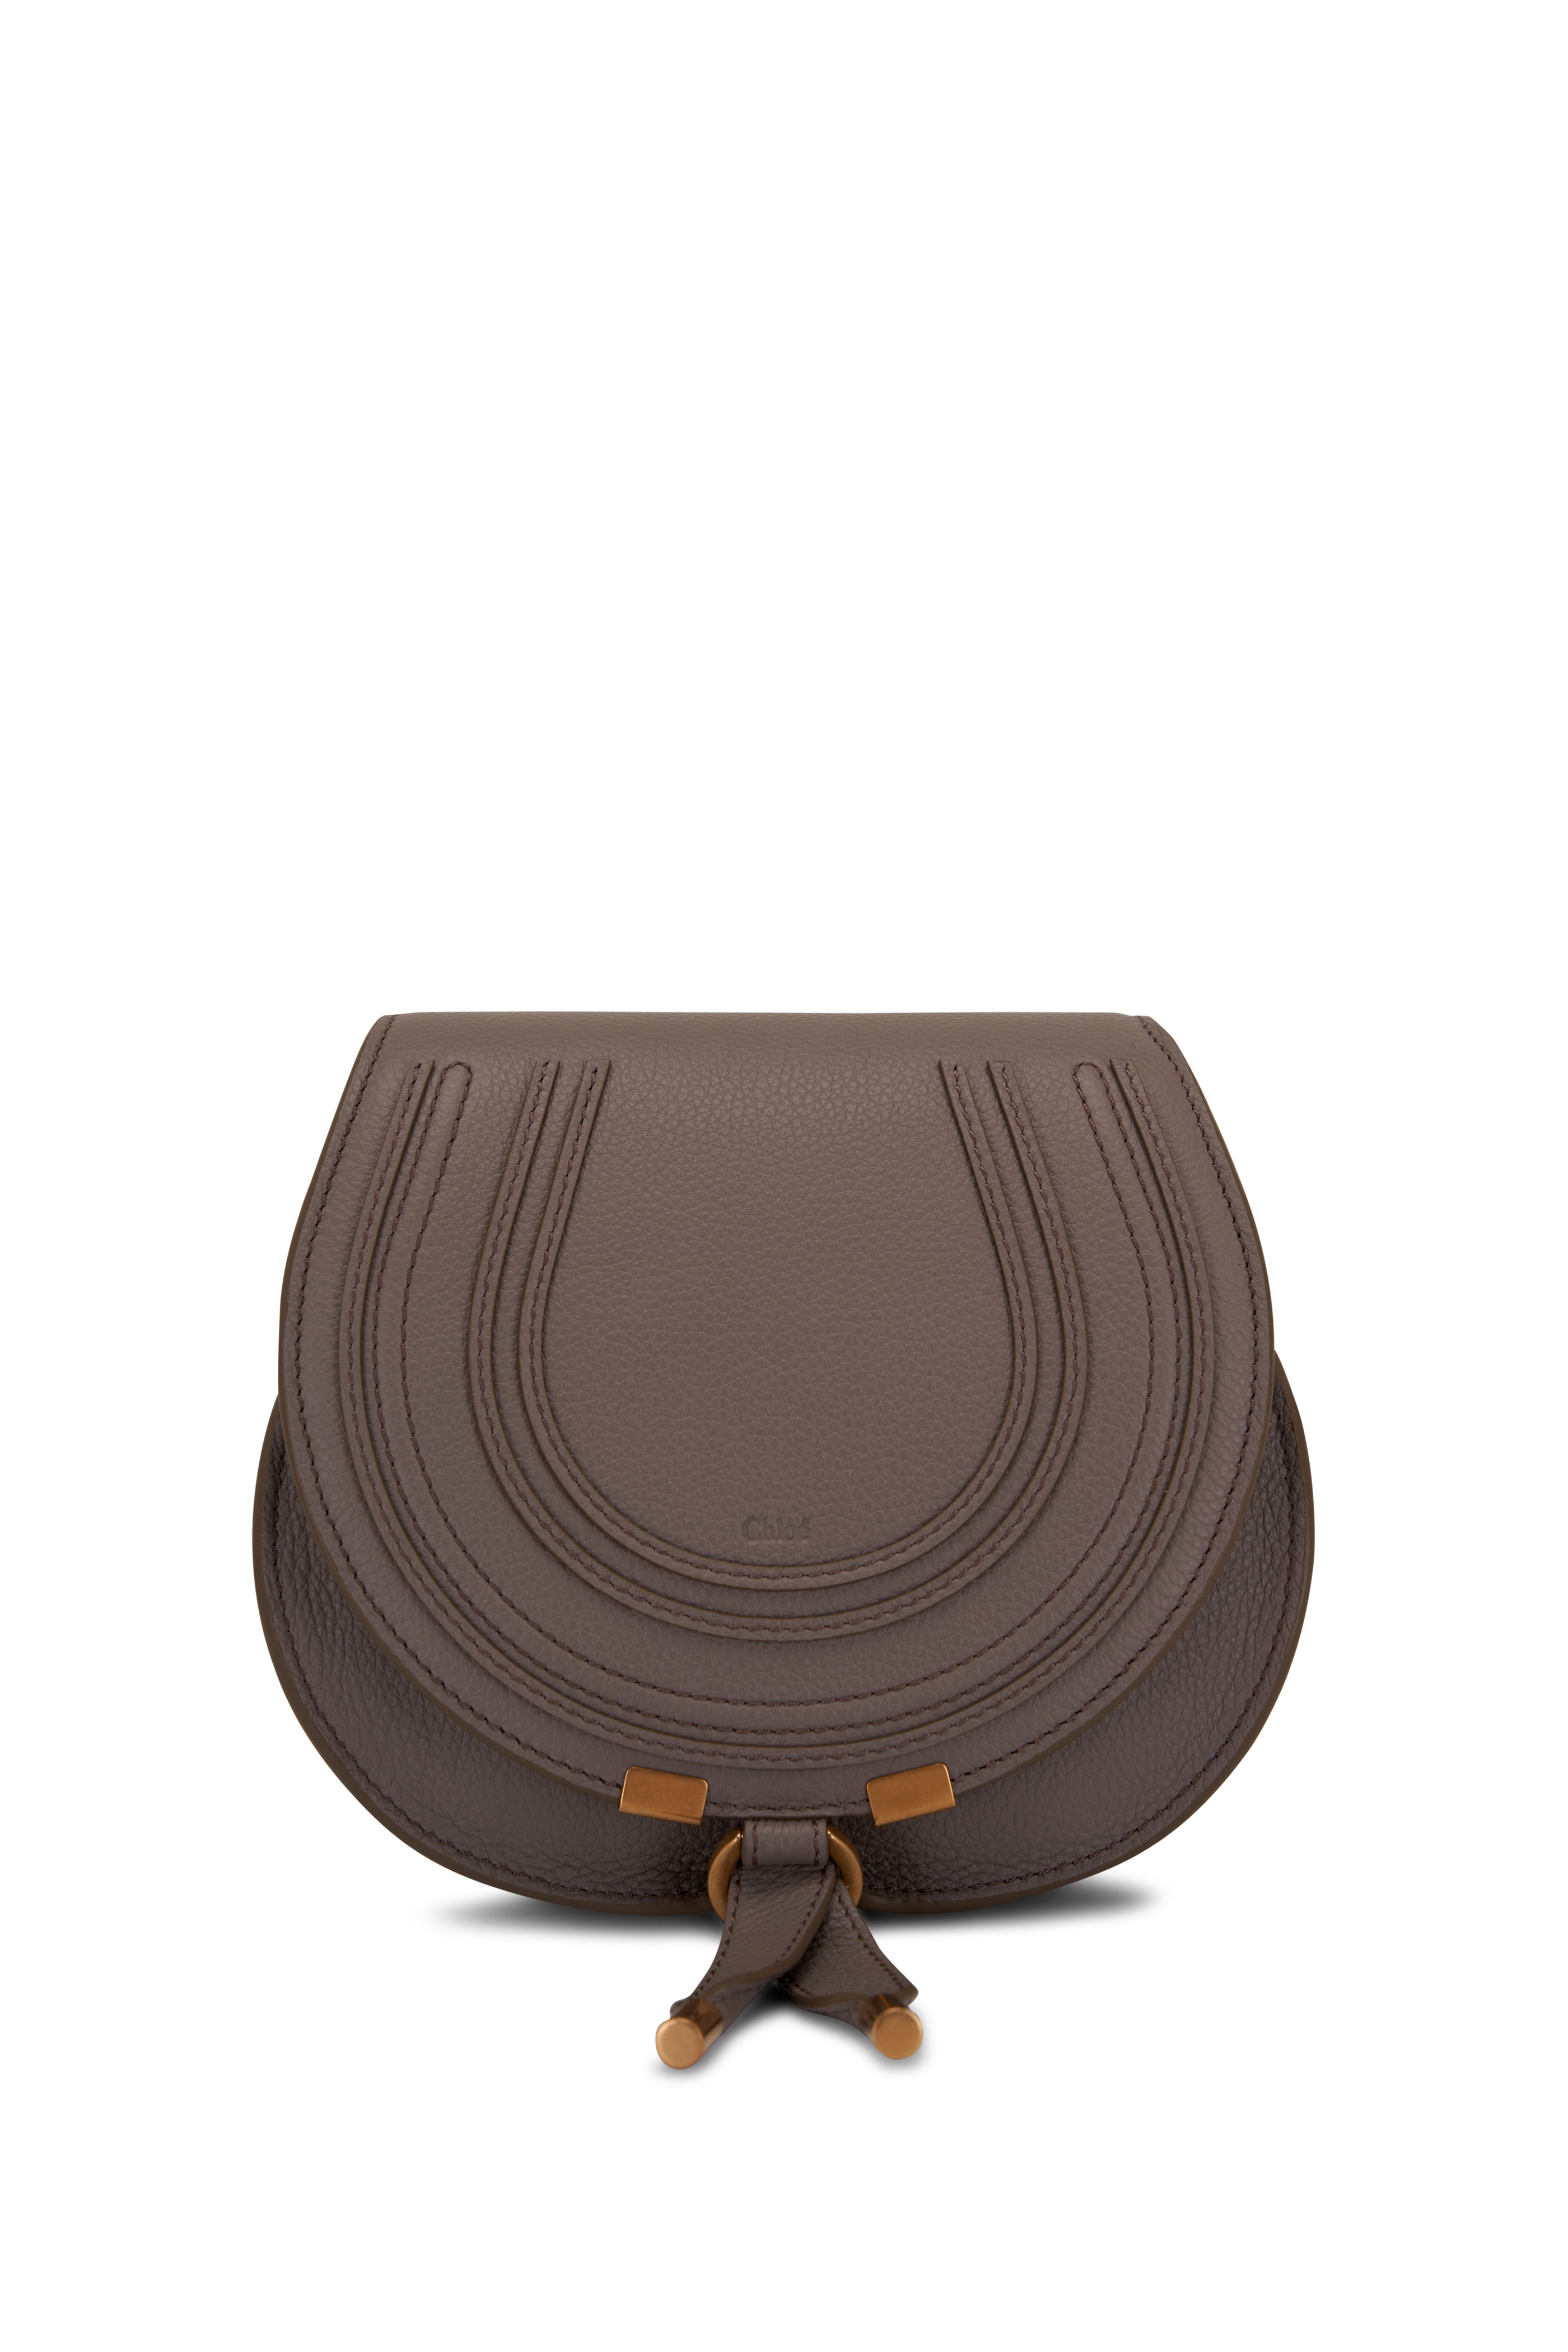 Chloé Tan Marcie Small Leather Clutch, Best Price and Reviews